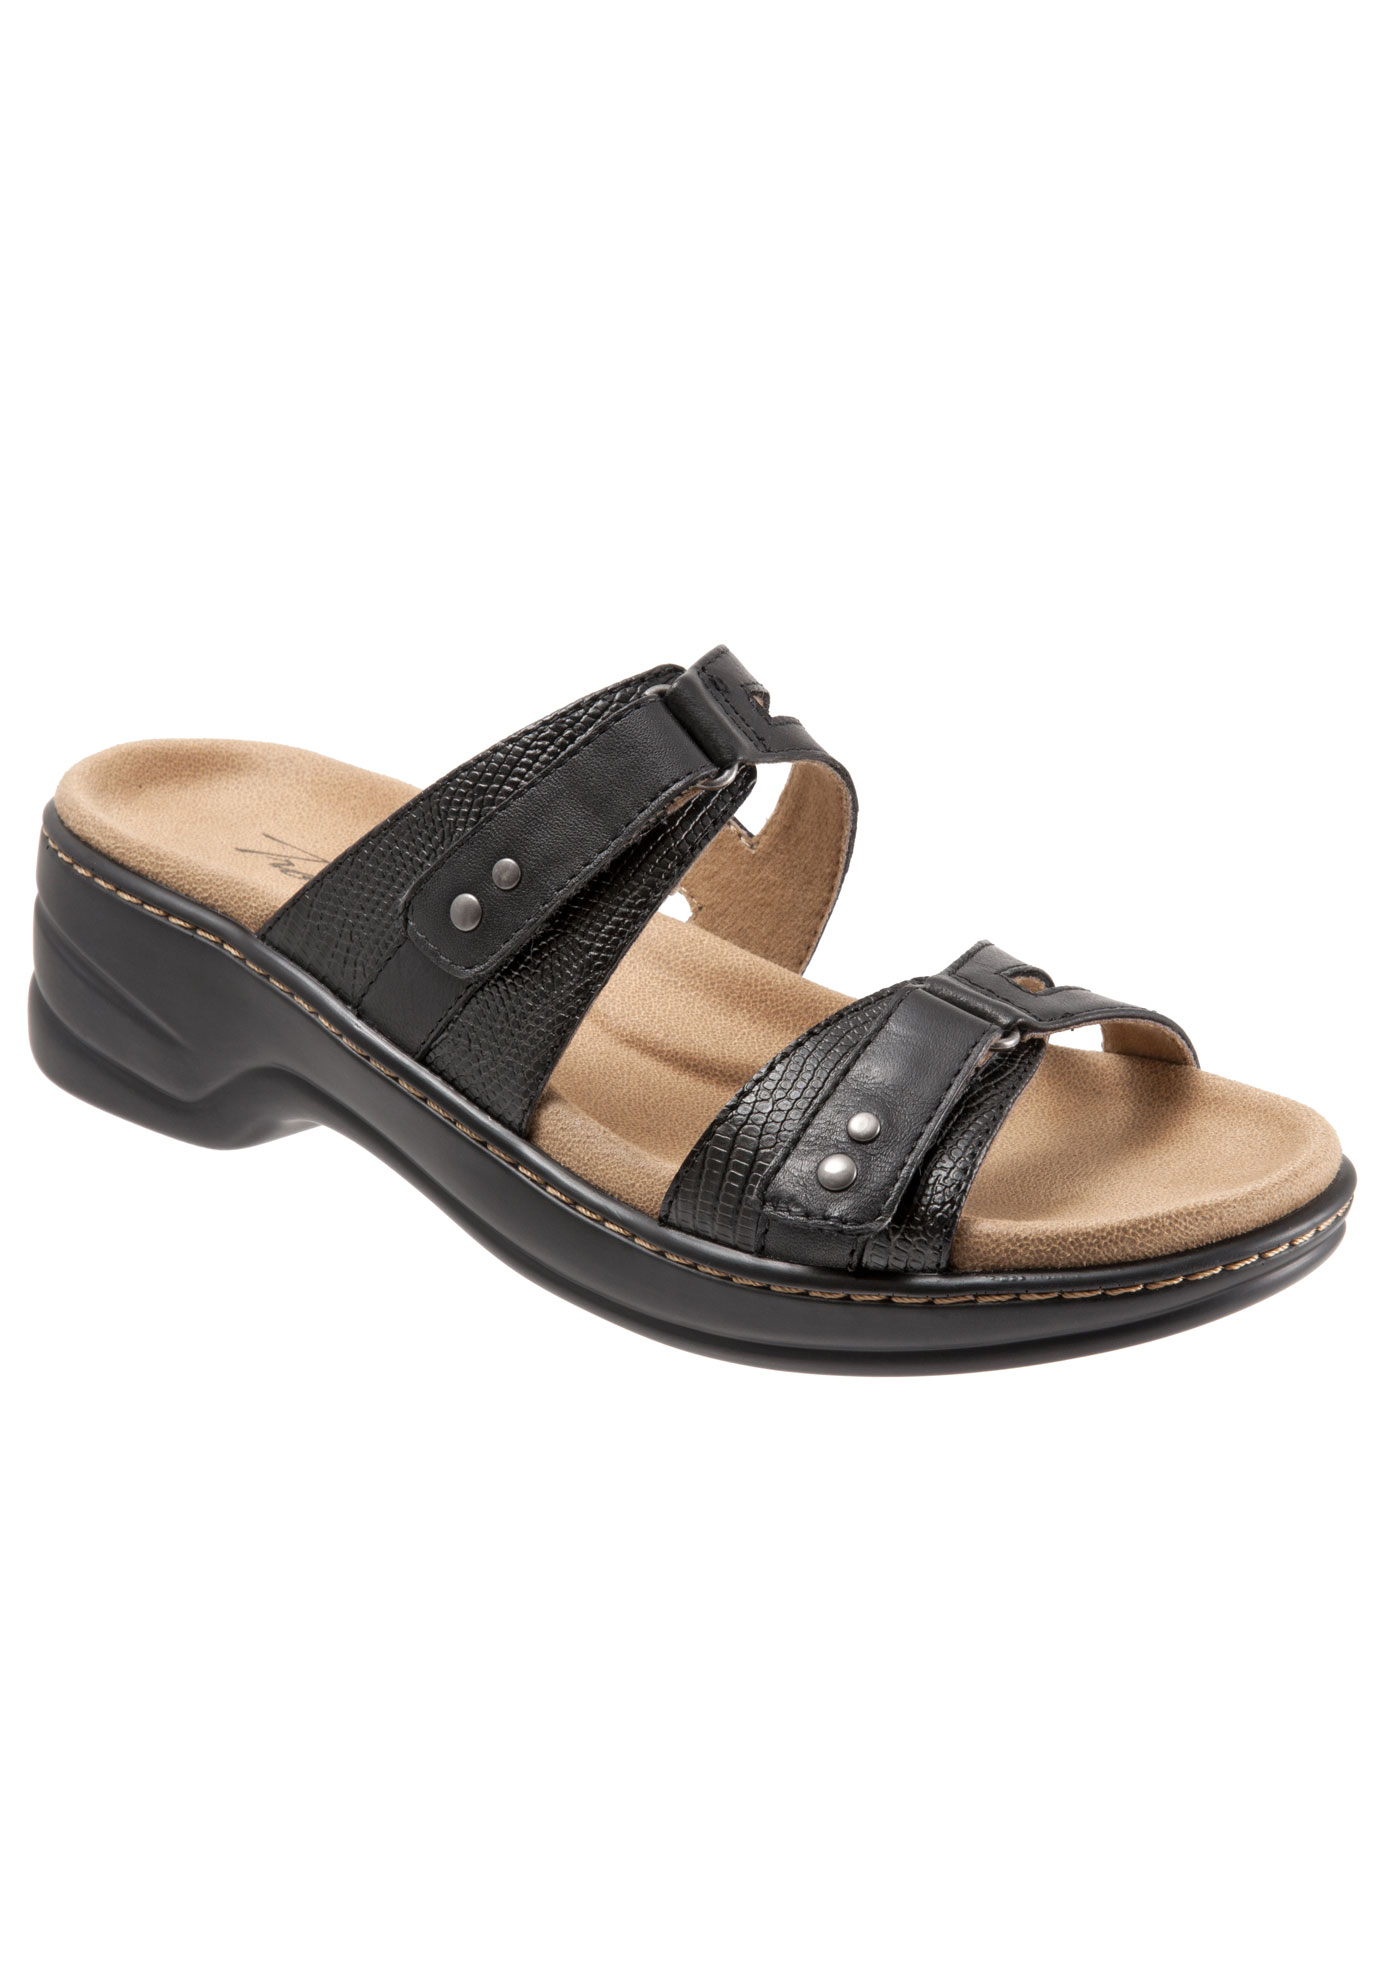 Neiman Sandals  by Trotters  Brylane Home